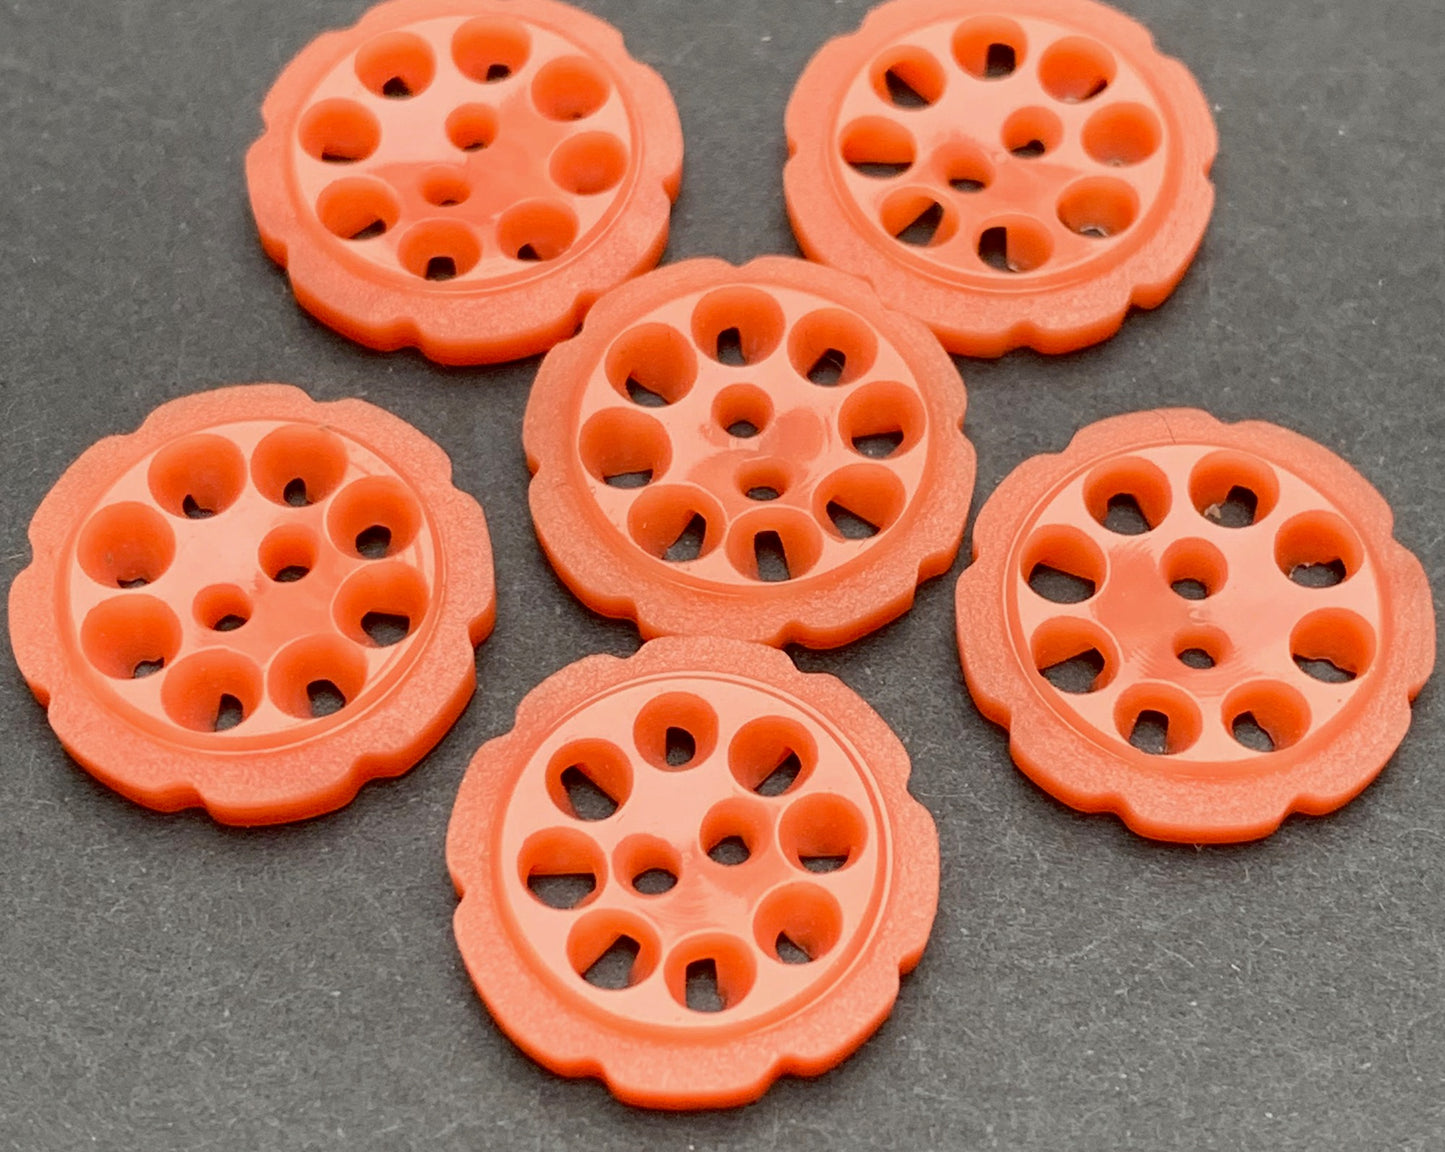 6 Coral Pink 2.2cm or 1.7cm Vintage French Buttons